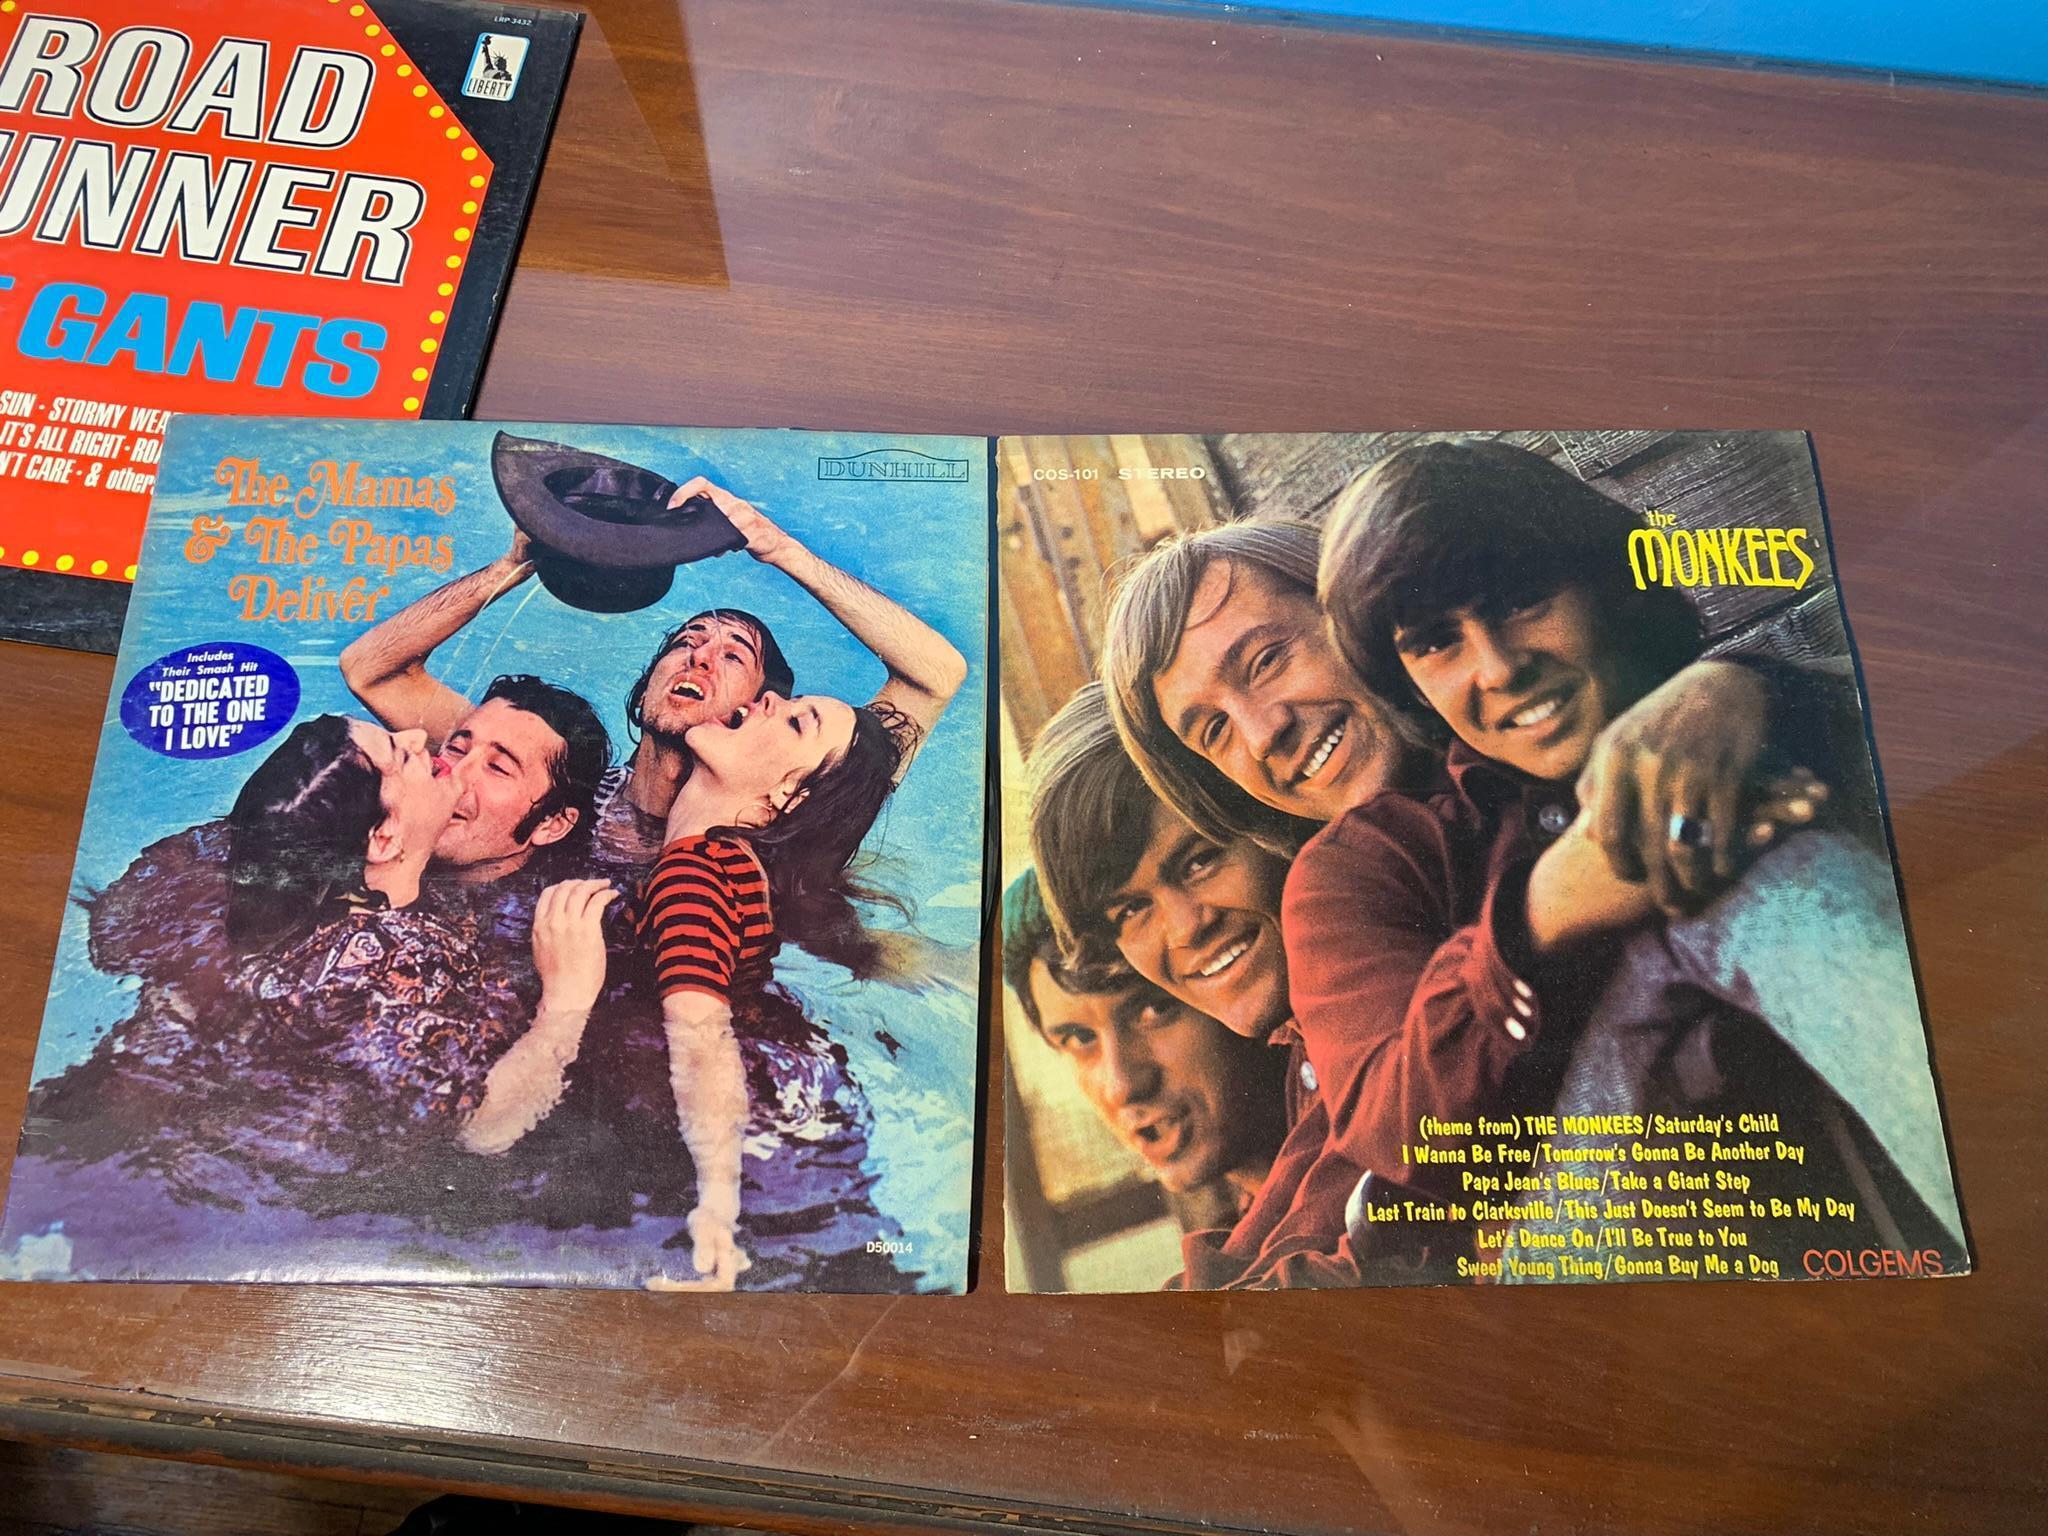 Group of 15 Records - The Youngbloods. Willie Nelson, The Monkees, Chicago